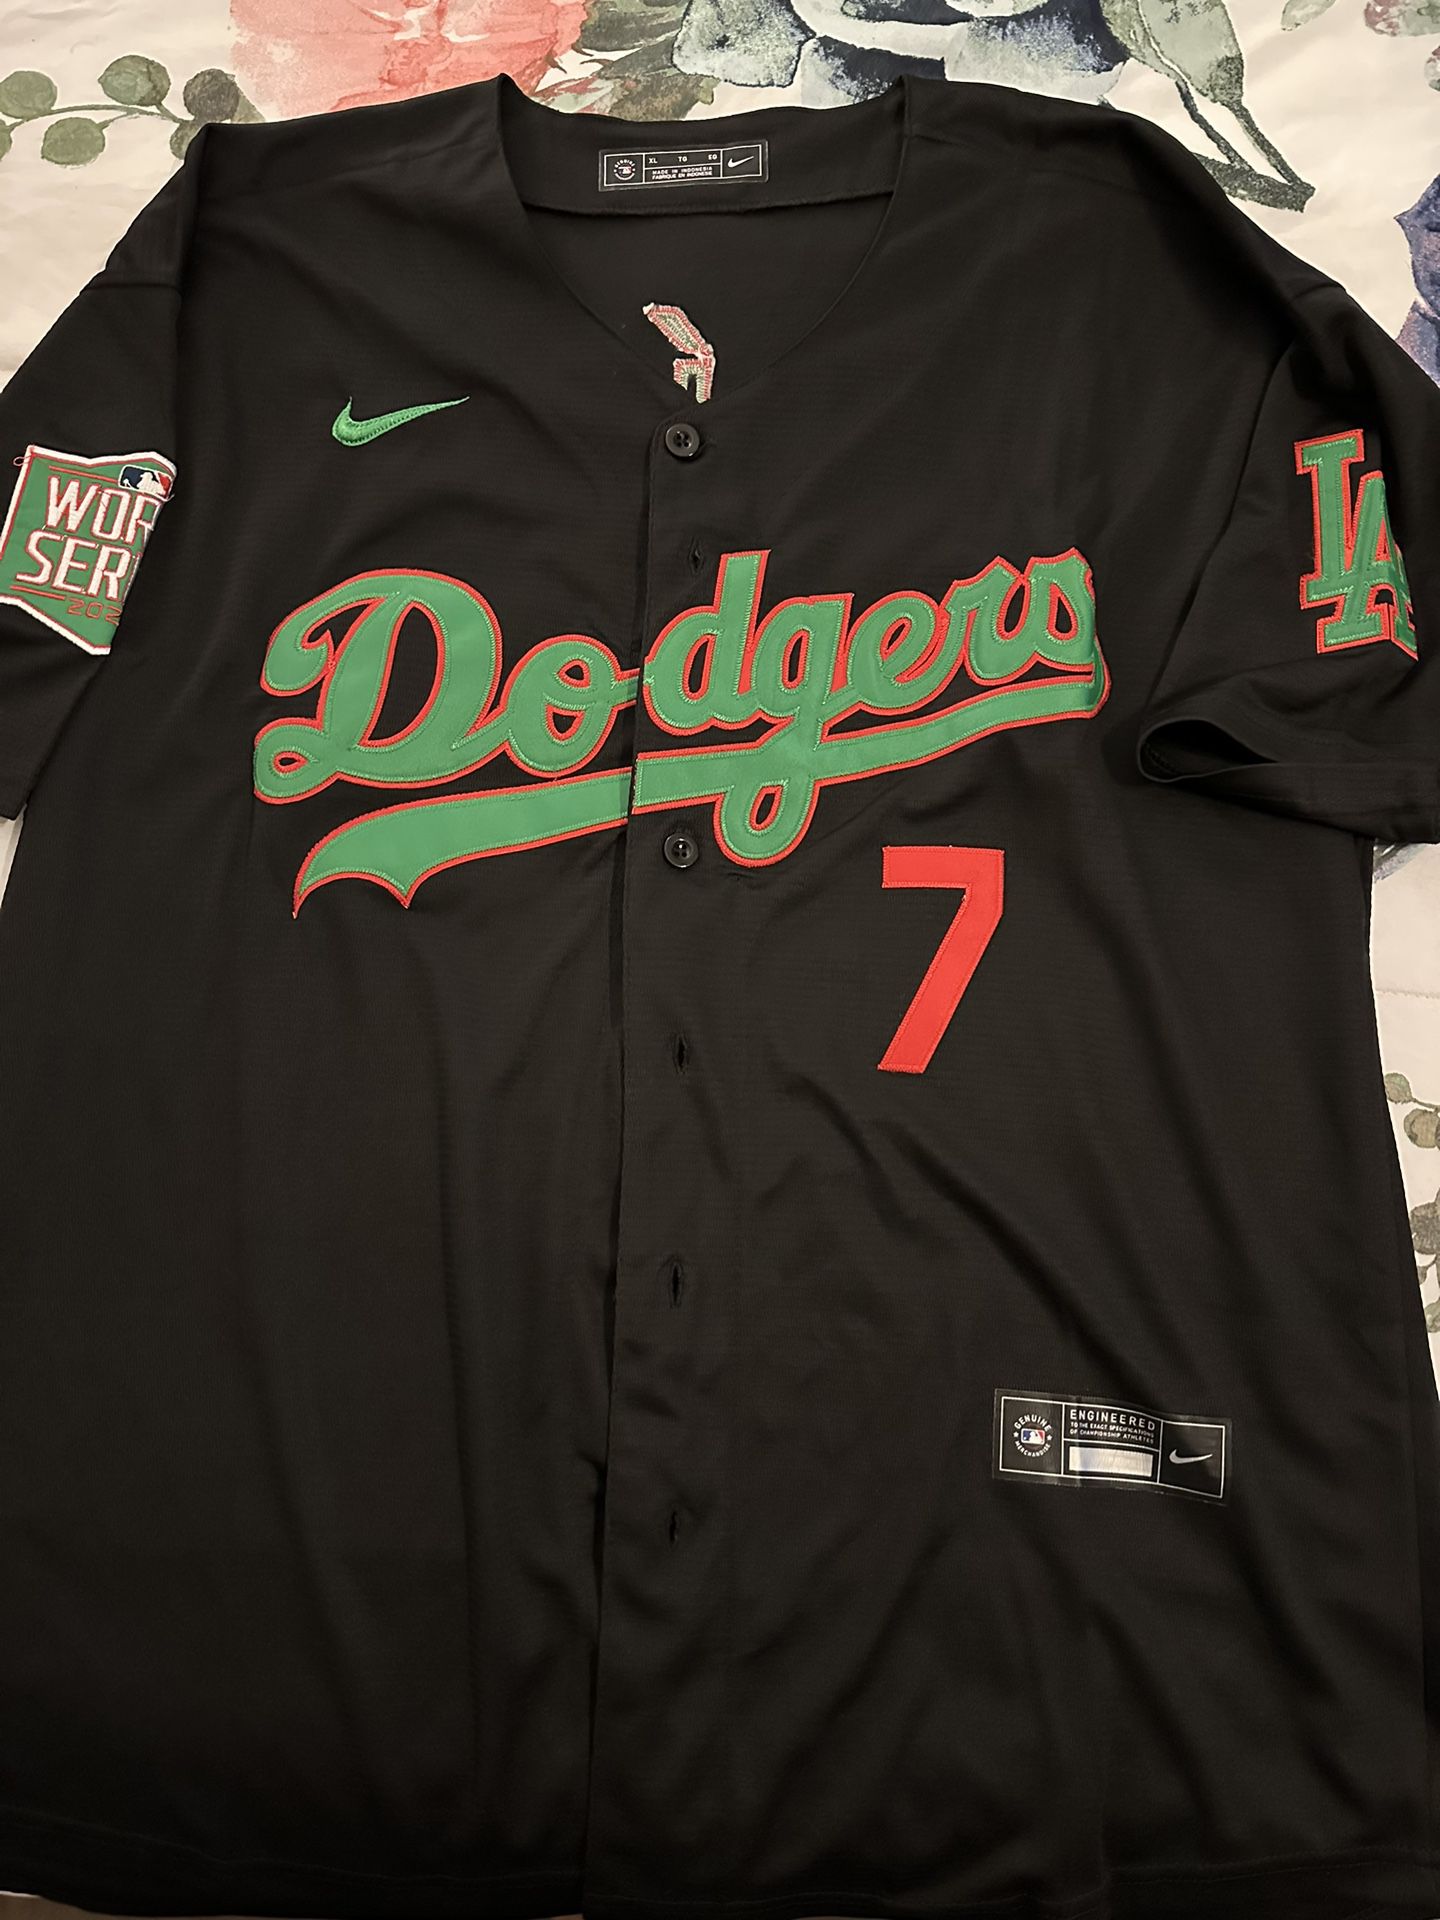 Men's Dodger Jersey.. X-Large.. Urias #7 for Sale in South Gate, CA -  OfferUp